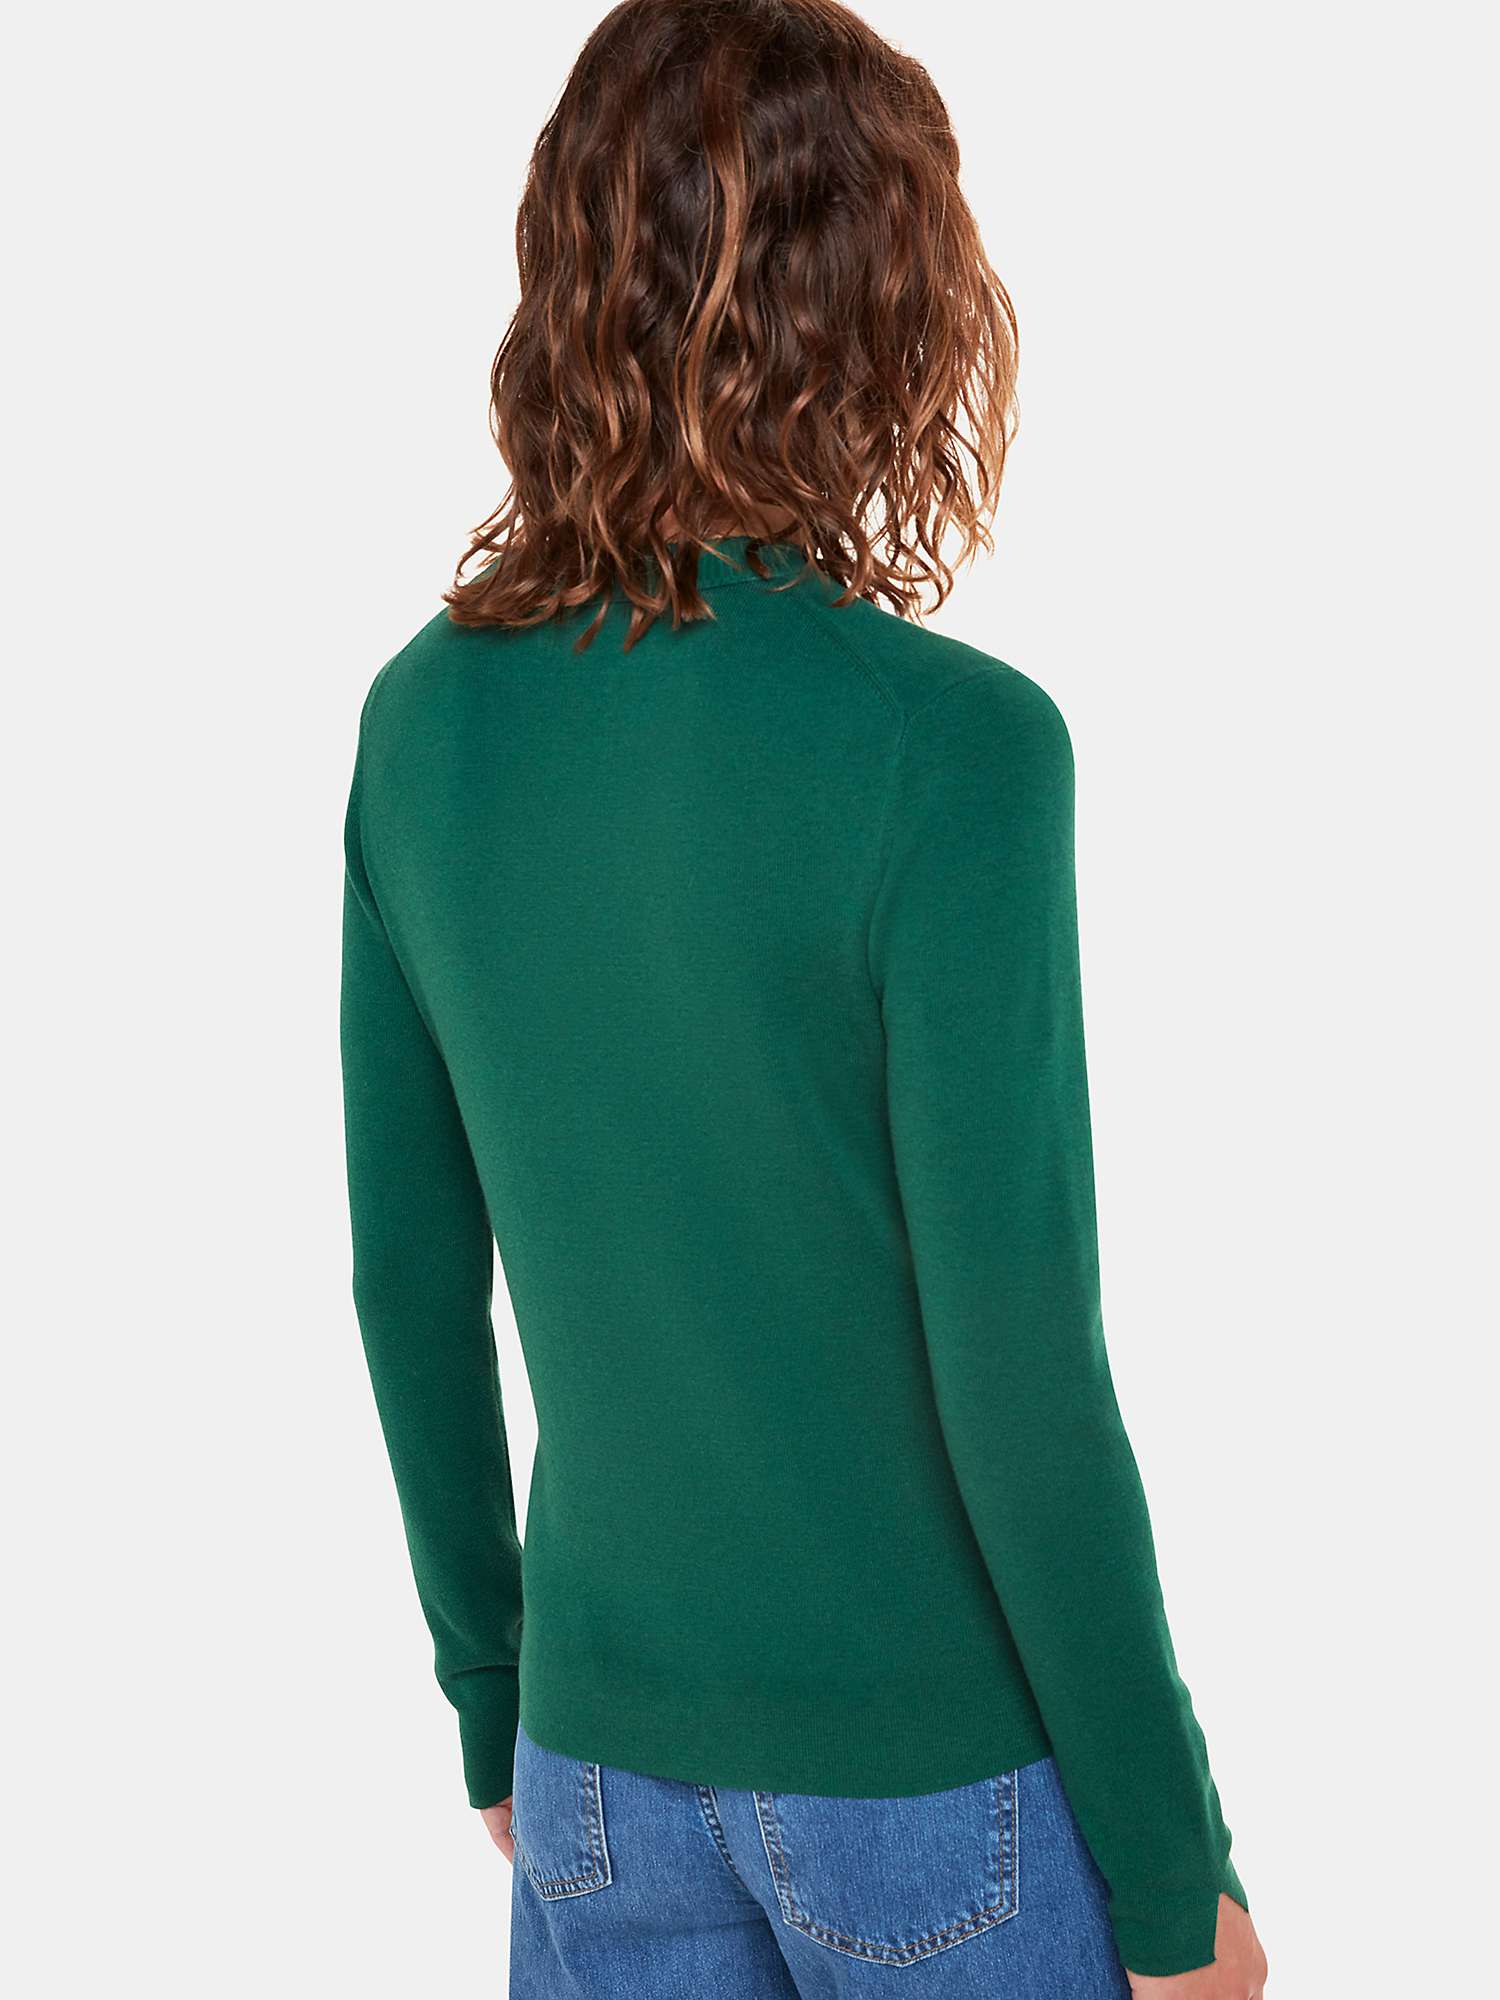 Buy Whistles Mia Fitted Crew Neck Jumper, Dark Green Online at johnlewis.com